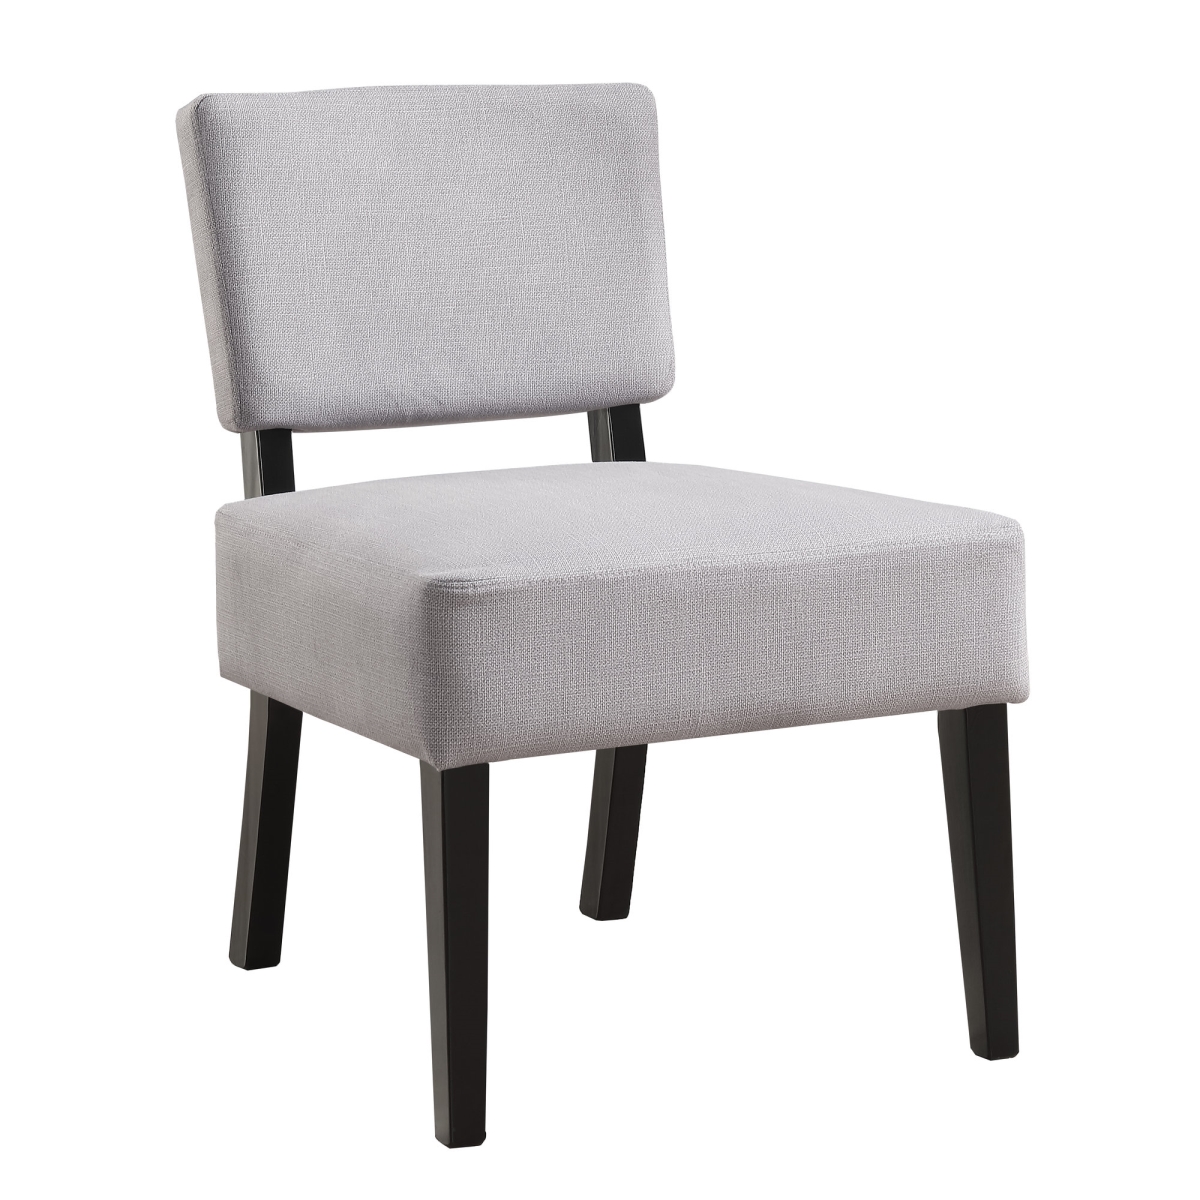 I 8276 Accent Chair, Light Grey Fabric